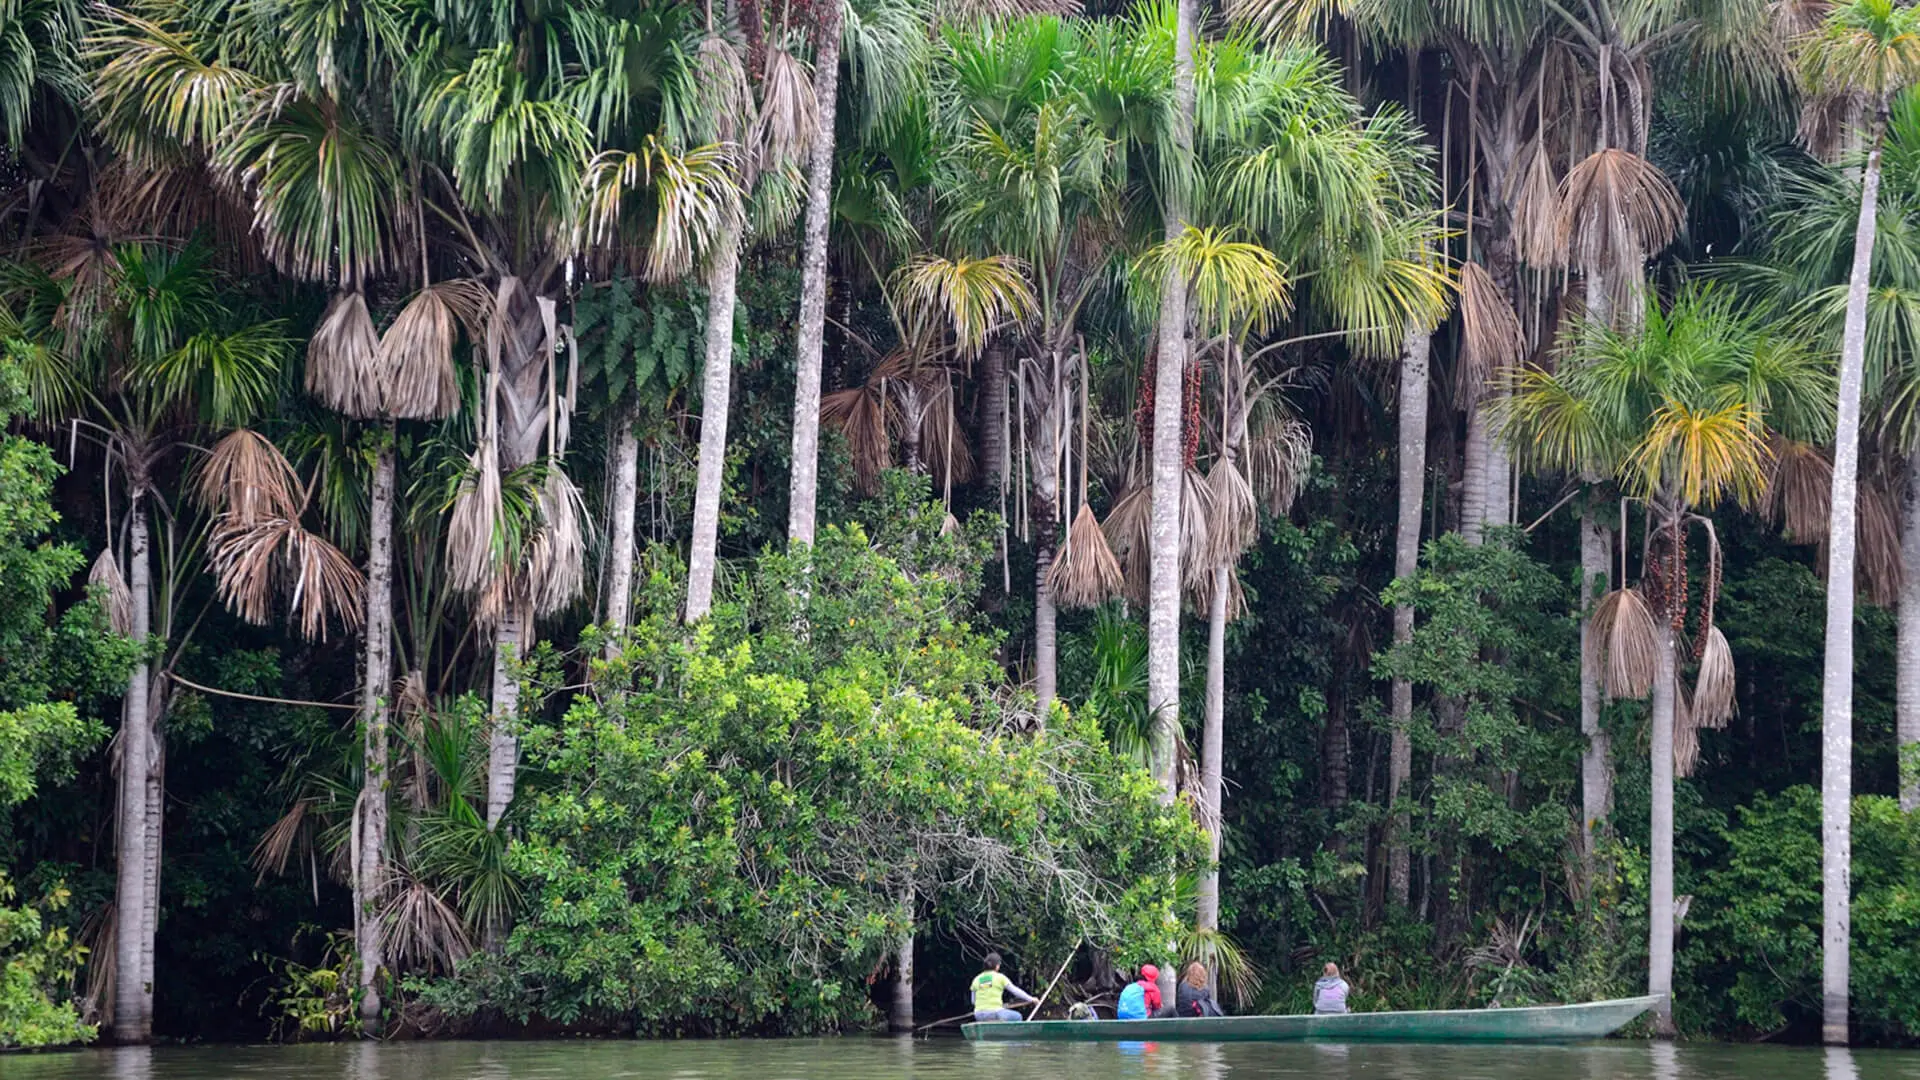 Giant aguaje palm trees at the border of lake Sandoval in Tambopata National Reserve and people on boat looking very small| Responsible Travel Peru